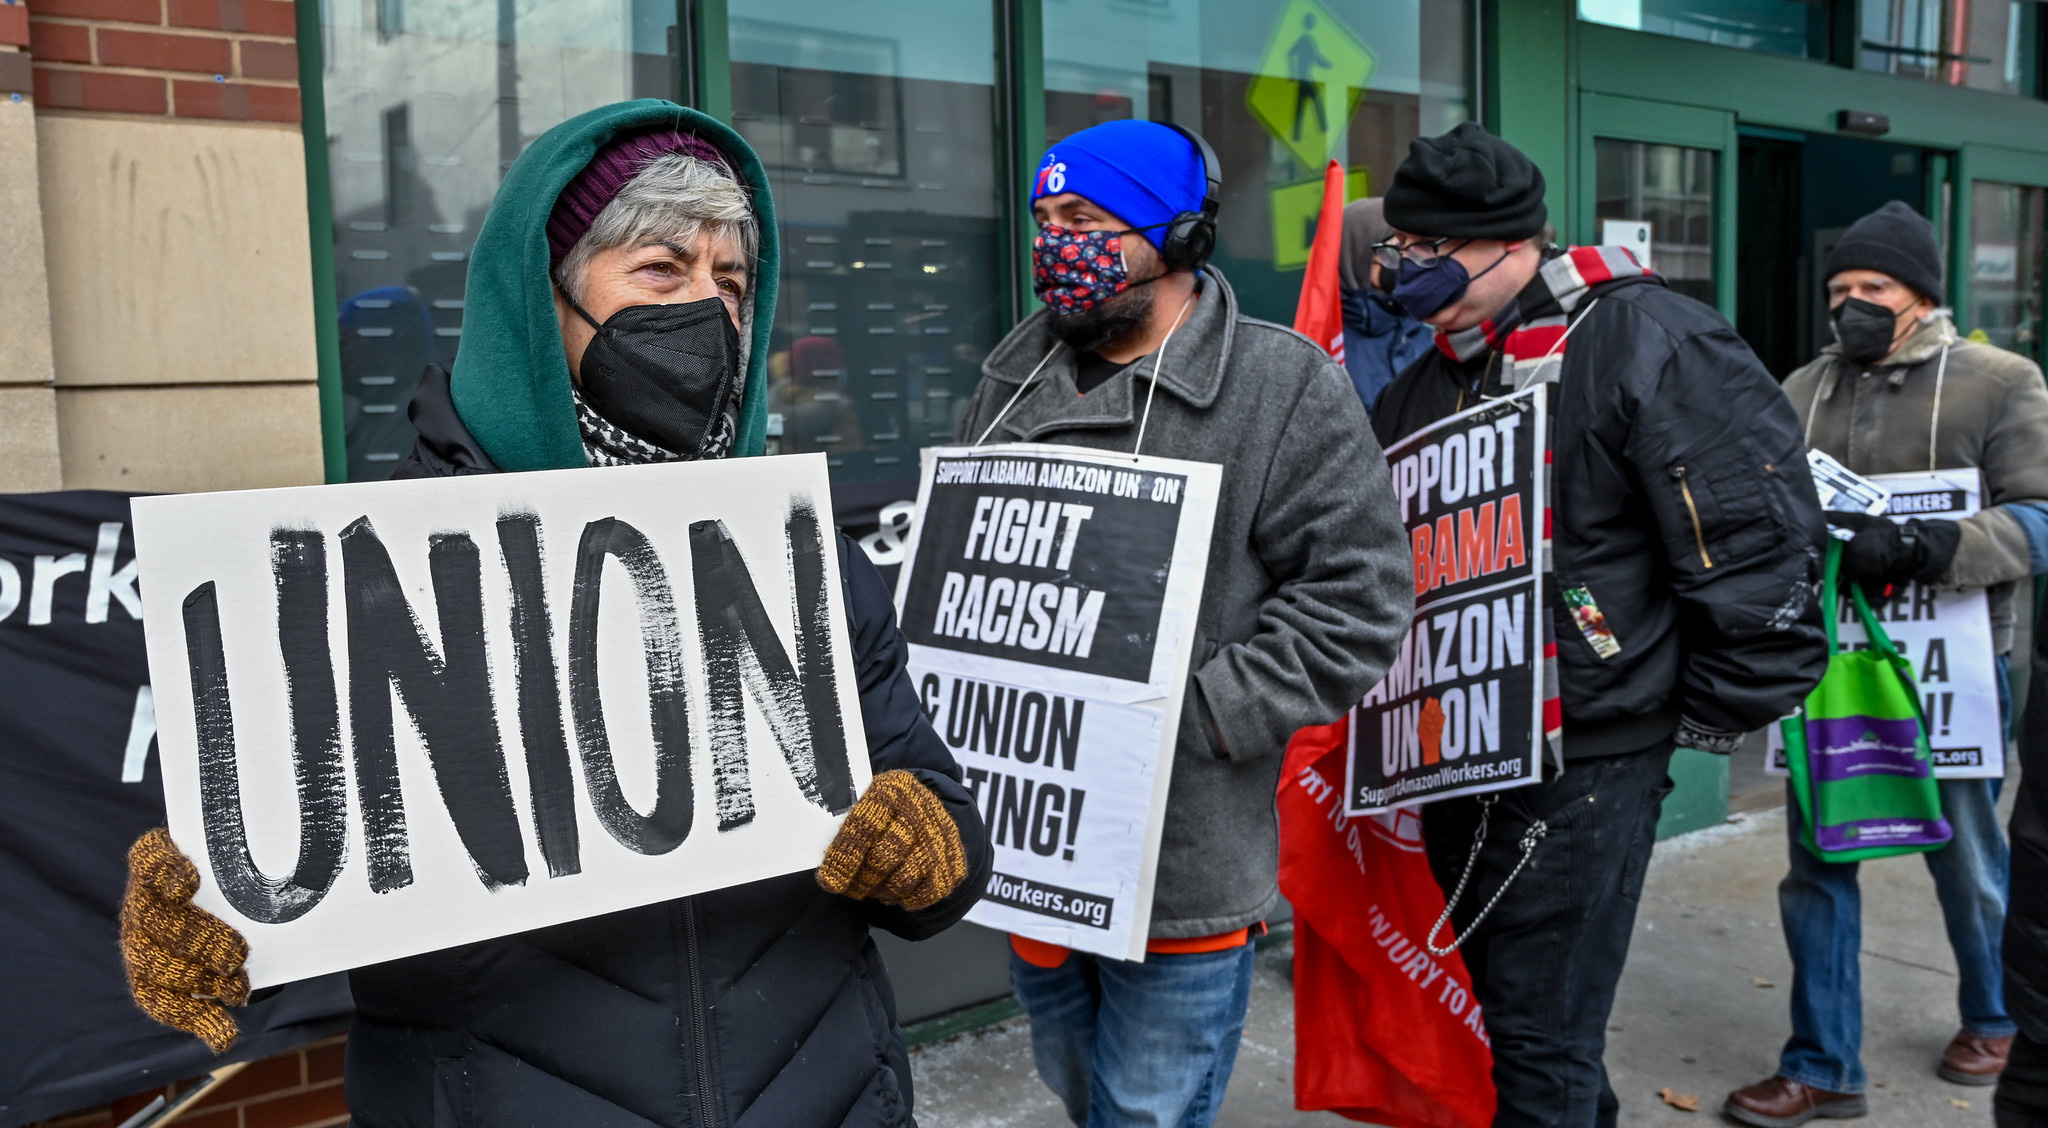 A group of protestors rallied in support of Amazon workers and unionization on January 15, 2022, in Philadelphia, Pennsylvania. 